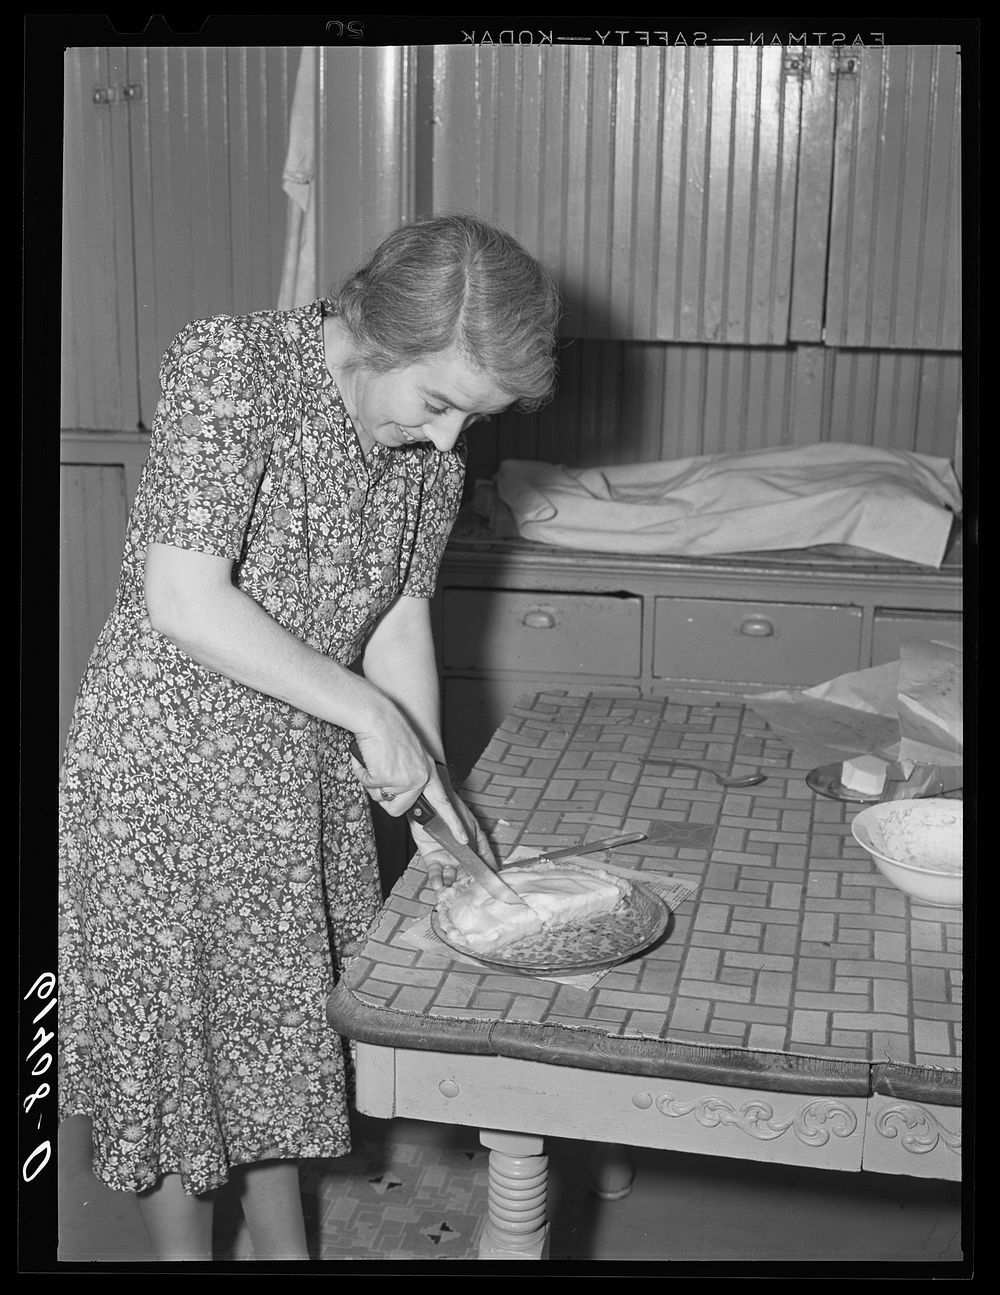 Farm woman cutting pieces of pie for supper. Meeker County, Minnesota. Sourced from the Library of Congress.